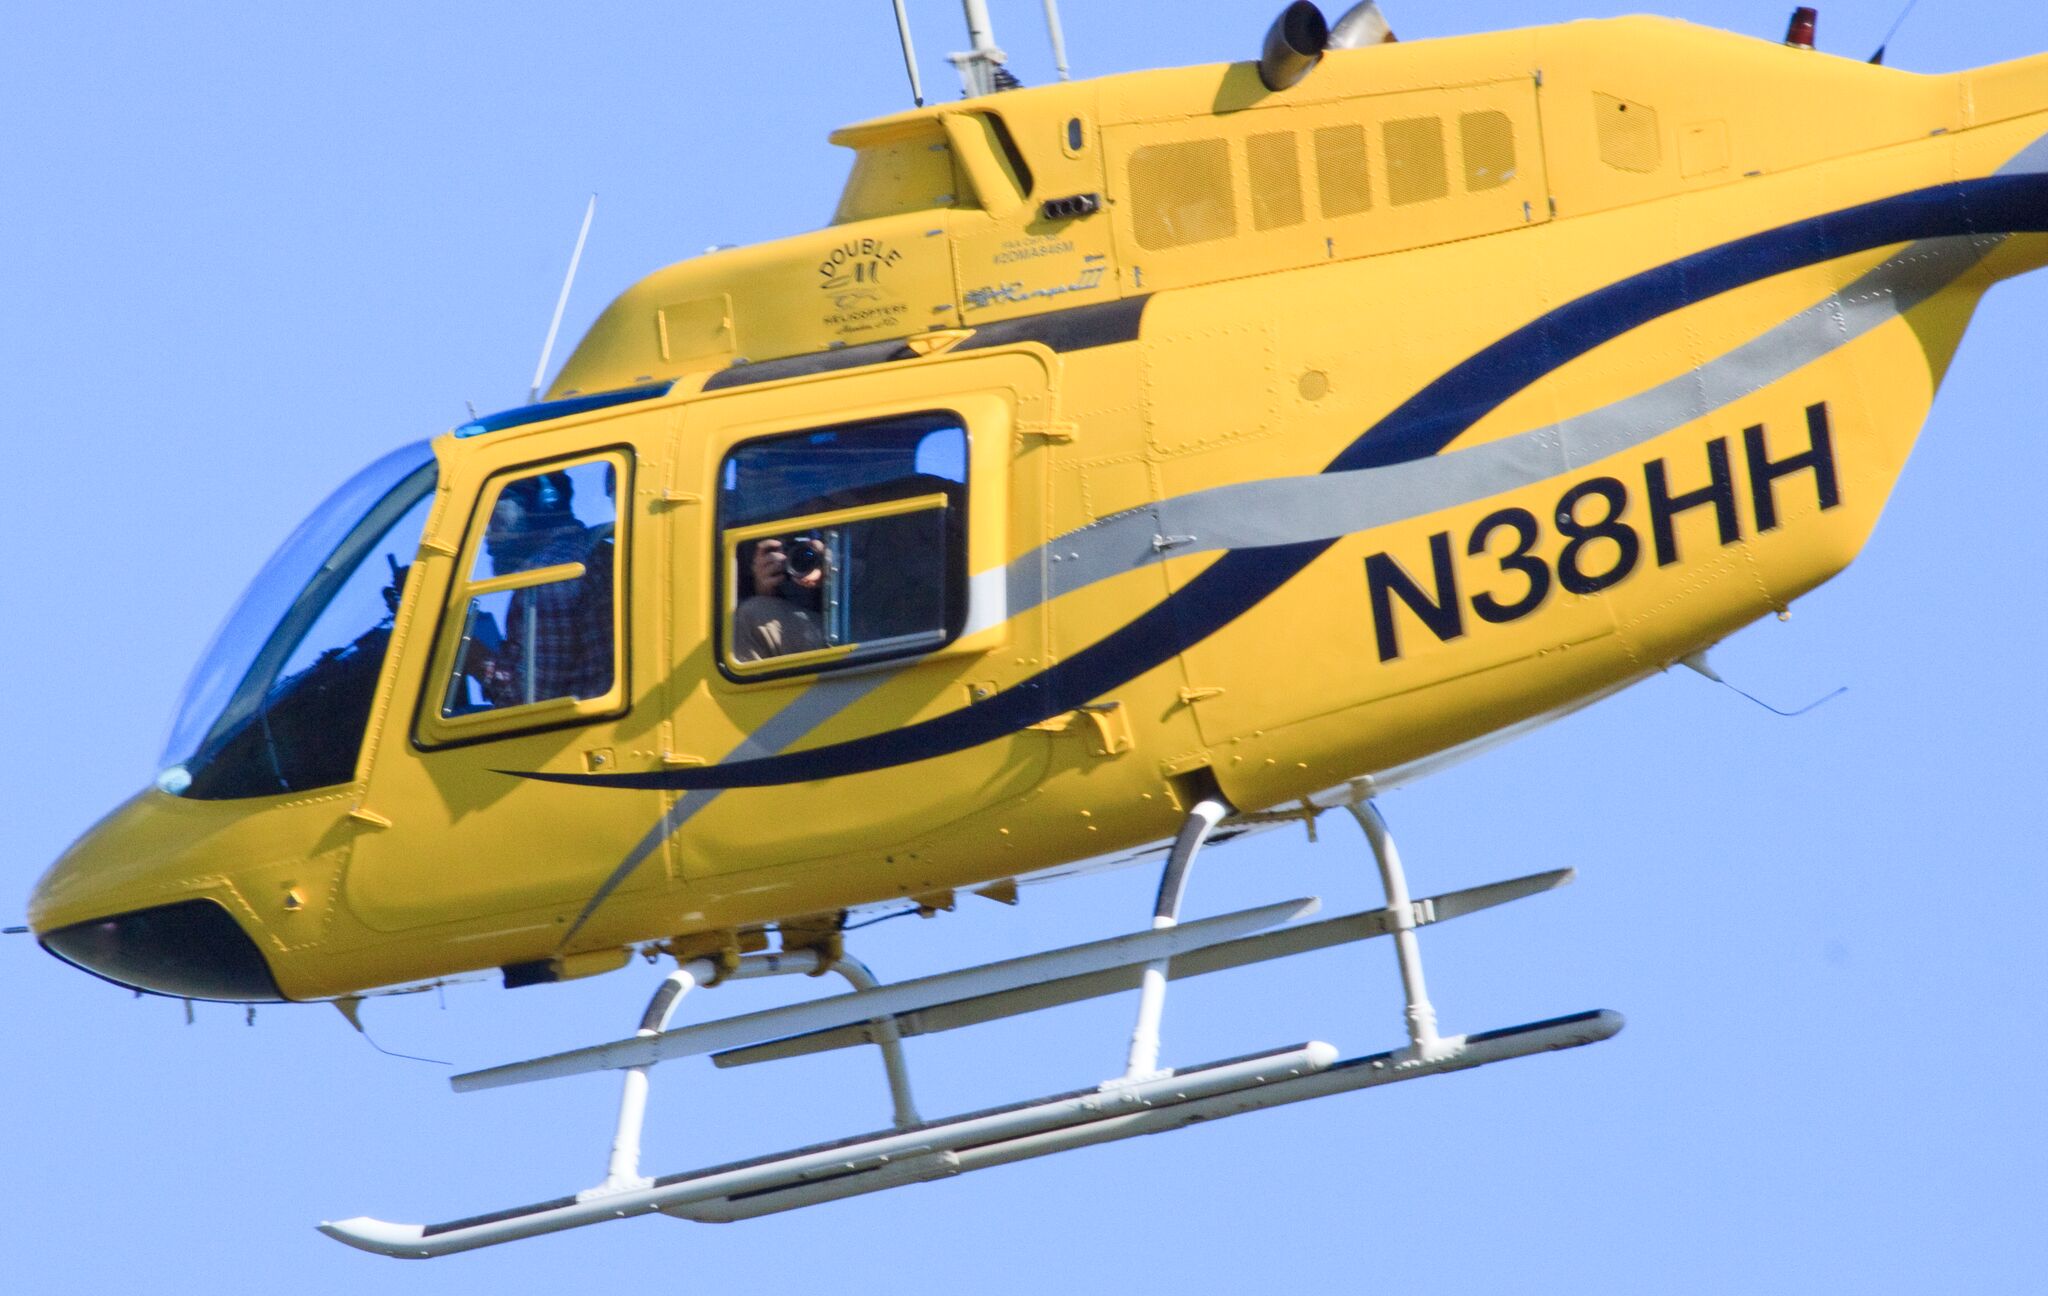 Yellow Helicopter w/ “Two Swoops” Decor #N38HH – owned by DOUBLE M ...